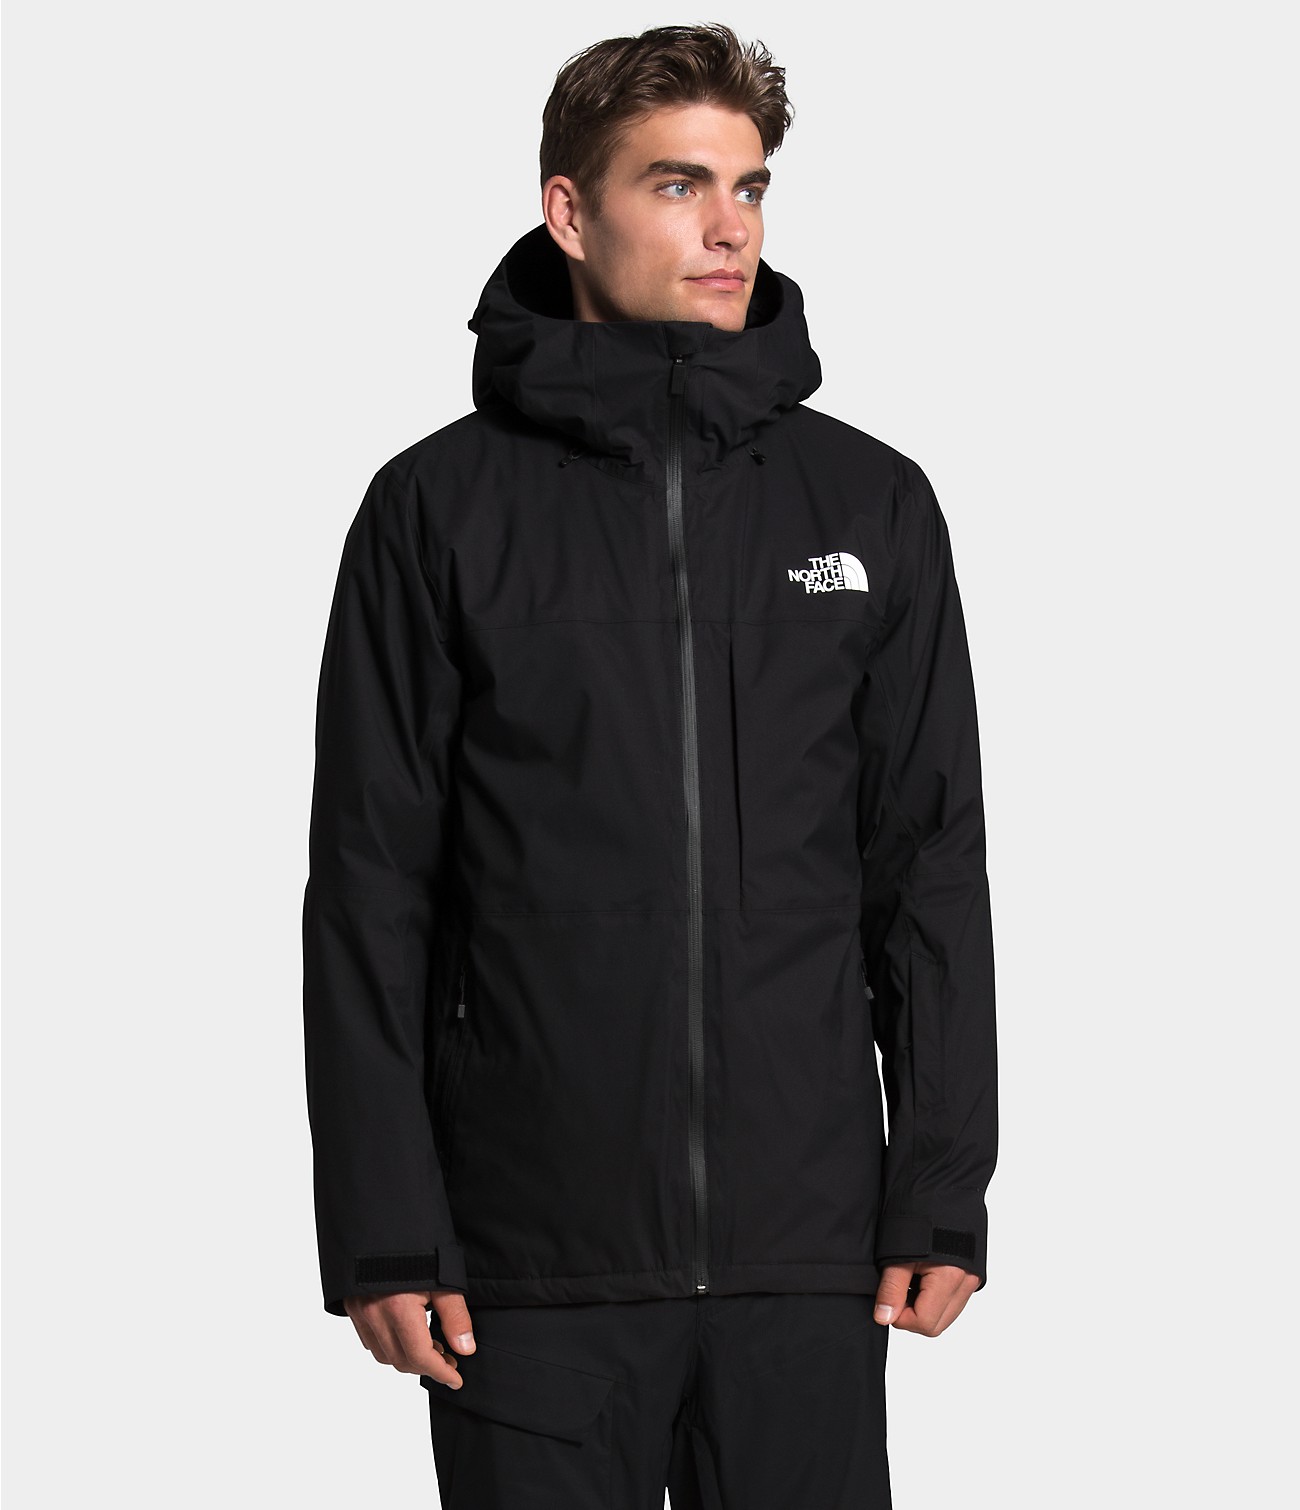 Unlock Wilderness' choice in the Black Diamond Vs North Face comparison, the ThermoBall™ Eco Snow Triclimate® Jacket by The North Face